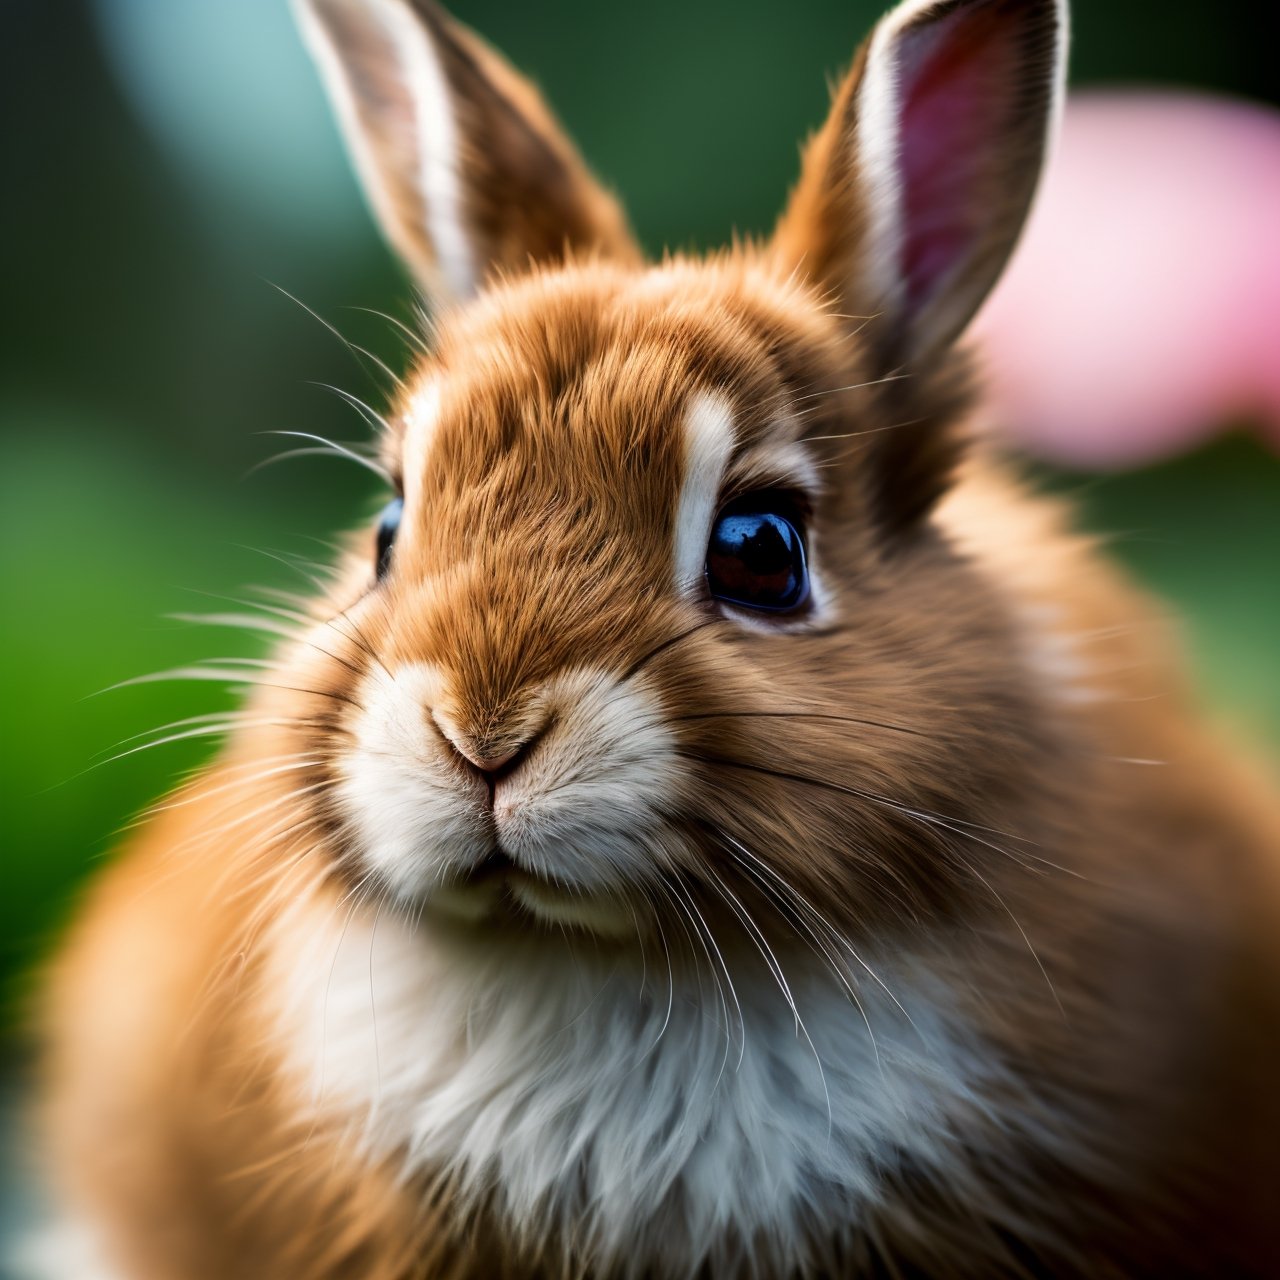 (best quality, 8K, ultra-detailed, masterpiece), (macro photography, close-up shot), Immerse yourself in the world of a captivating rabbit with this 8K masterpiece. Use the power of macro photography to capture an ultra-detailed, close-up shot of the rabbit. Highlight its intricate fur, the delicate texture of its whiskers, and the depth in its expressive eyes. This image should transport viewers into the tiny world of this enchanting creature, showcasing its beauty in exquisite detail.